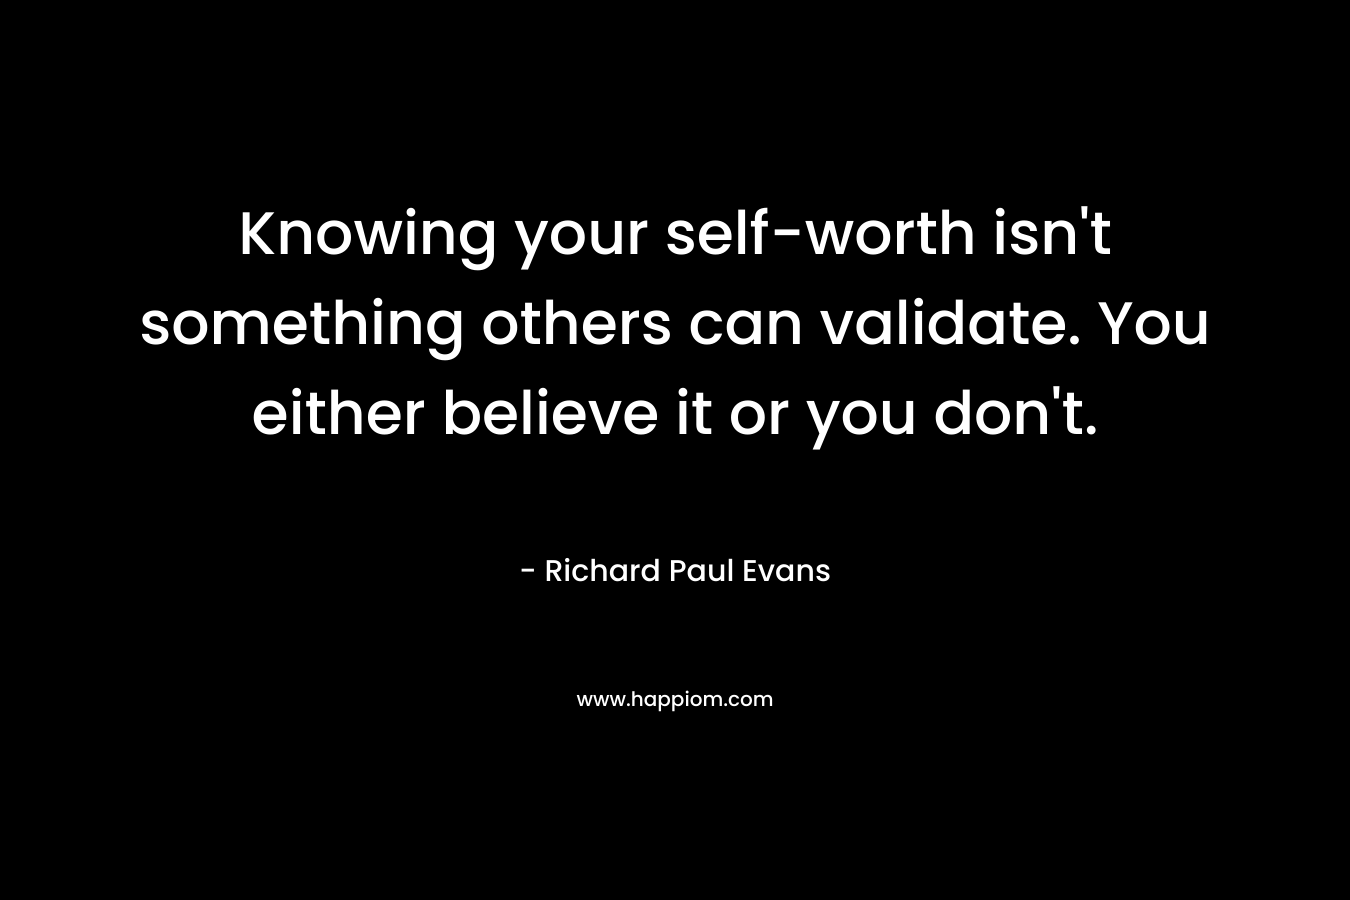 Knowing your self-worth isn’t something others can validate. You either believe it or you don’t. – Richard Paul Evans